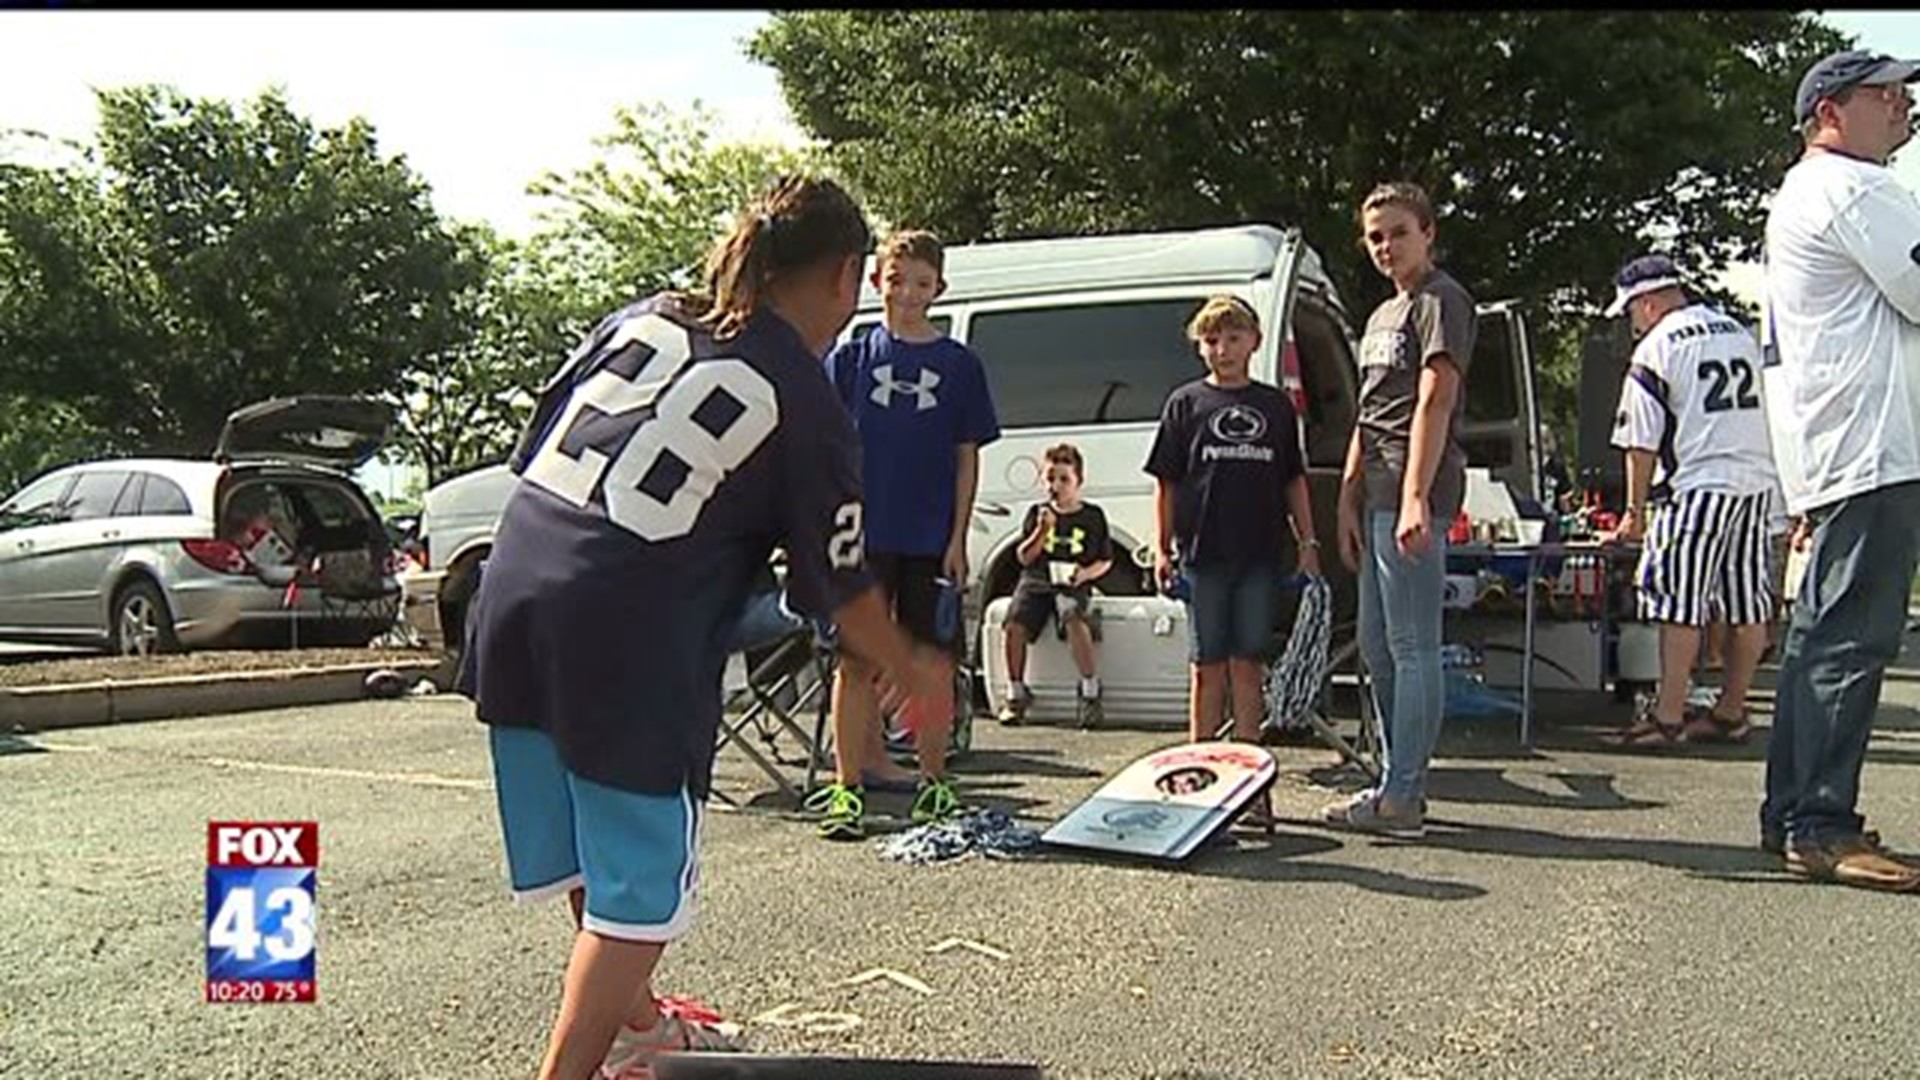 Fans Make Their Way to State College for First PSU Home Game